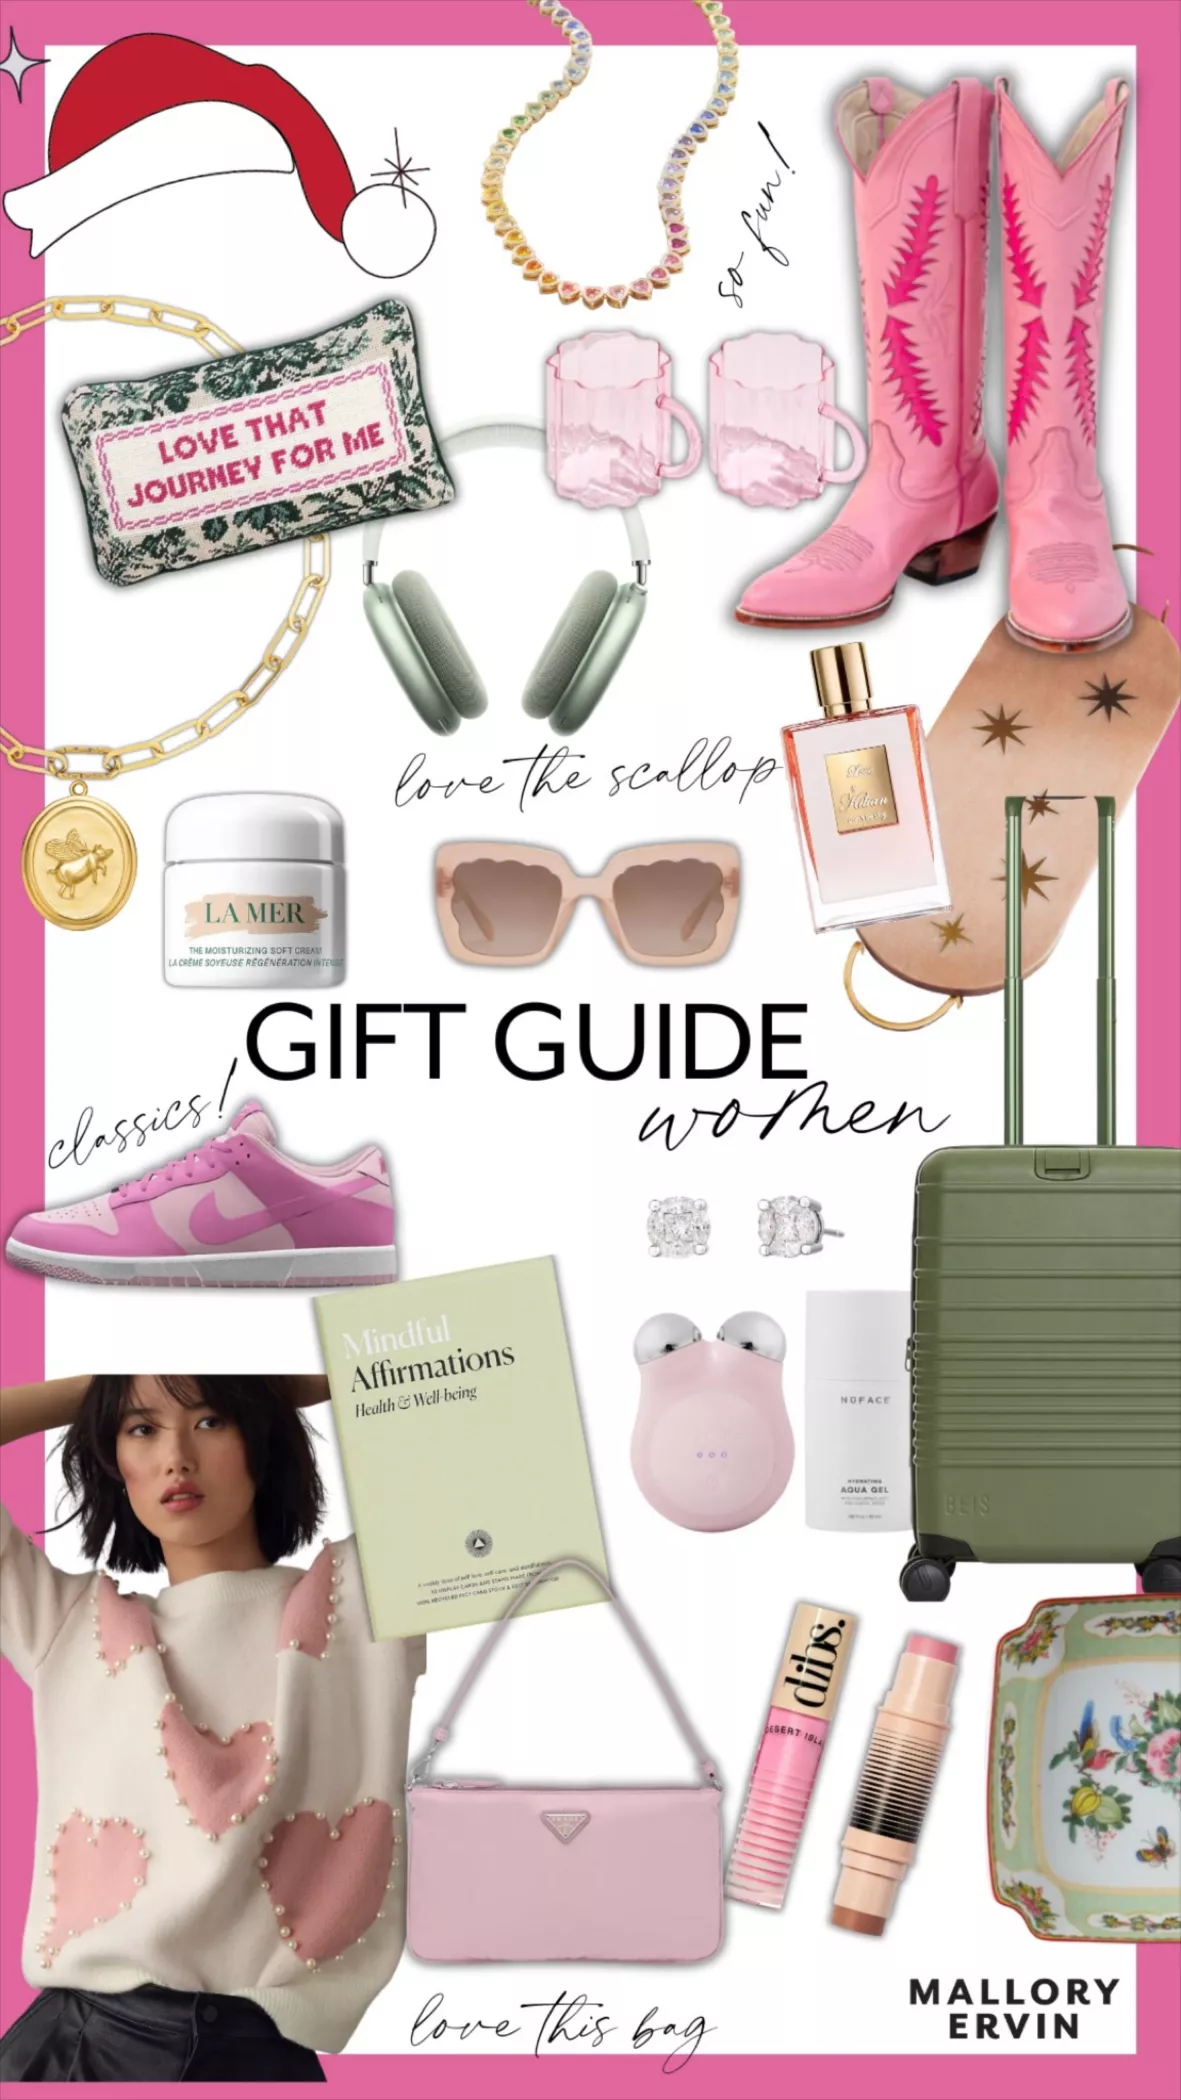 Gift Ideas for Women: My Favorite Things + Wish List - Lovely